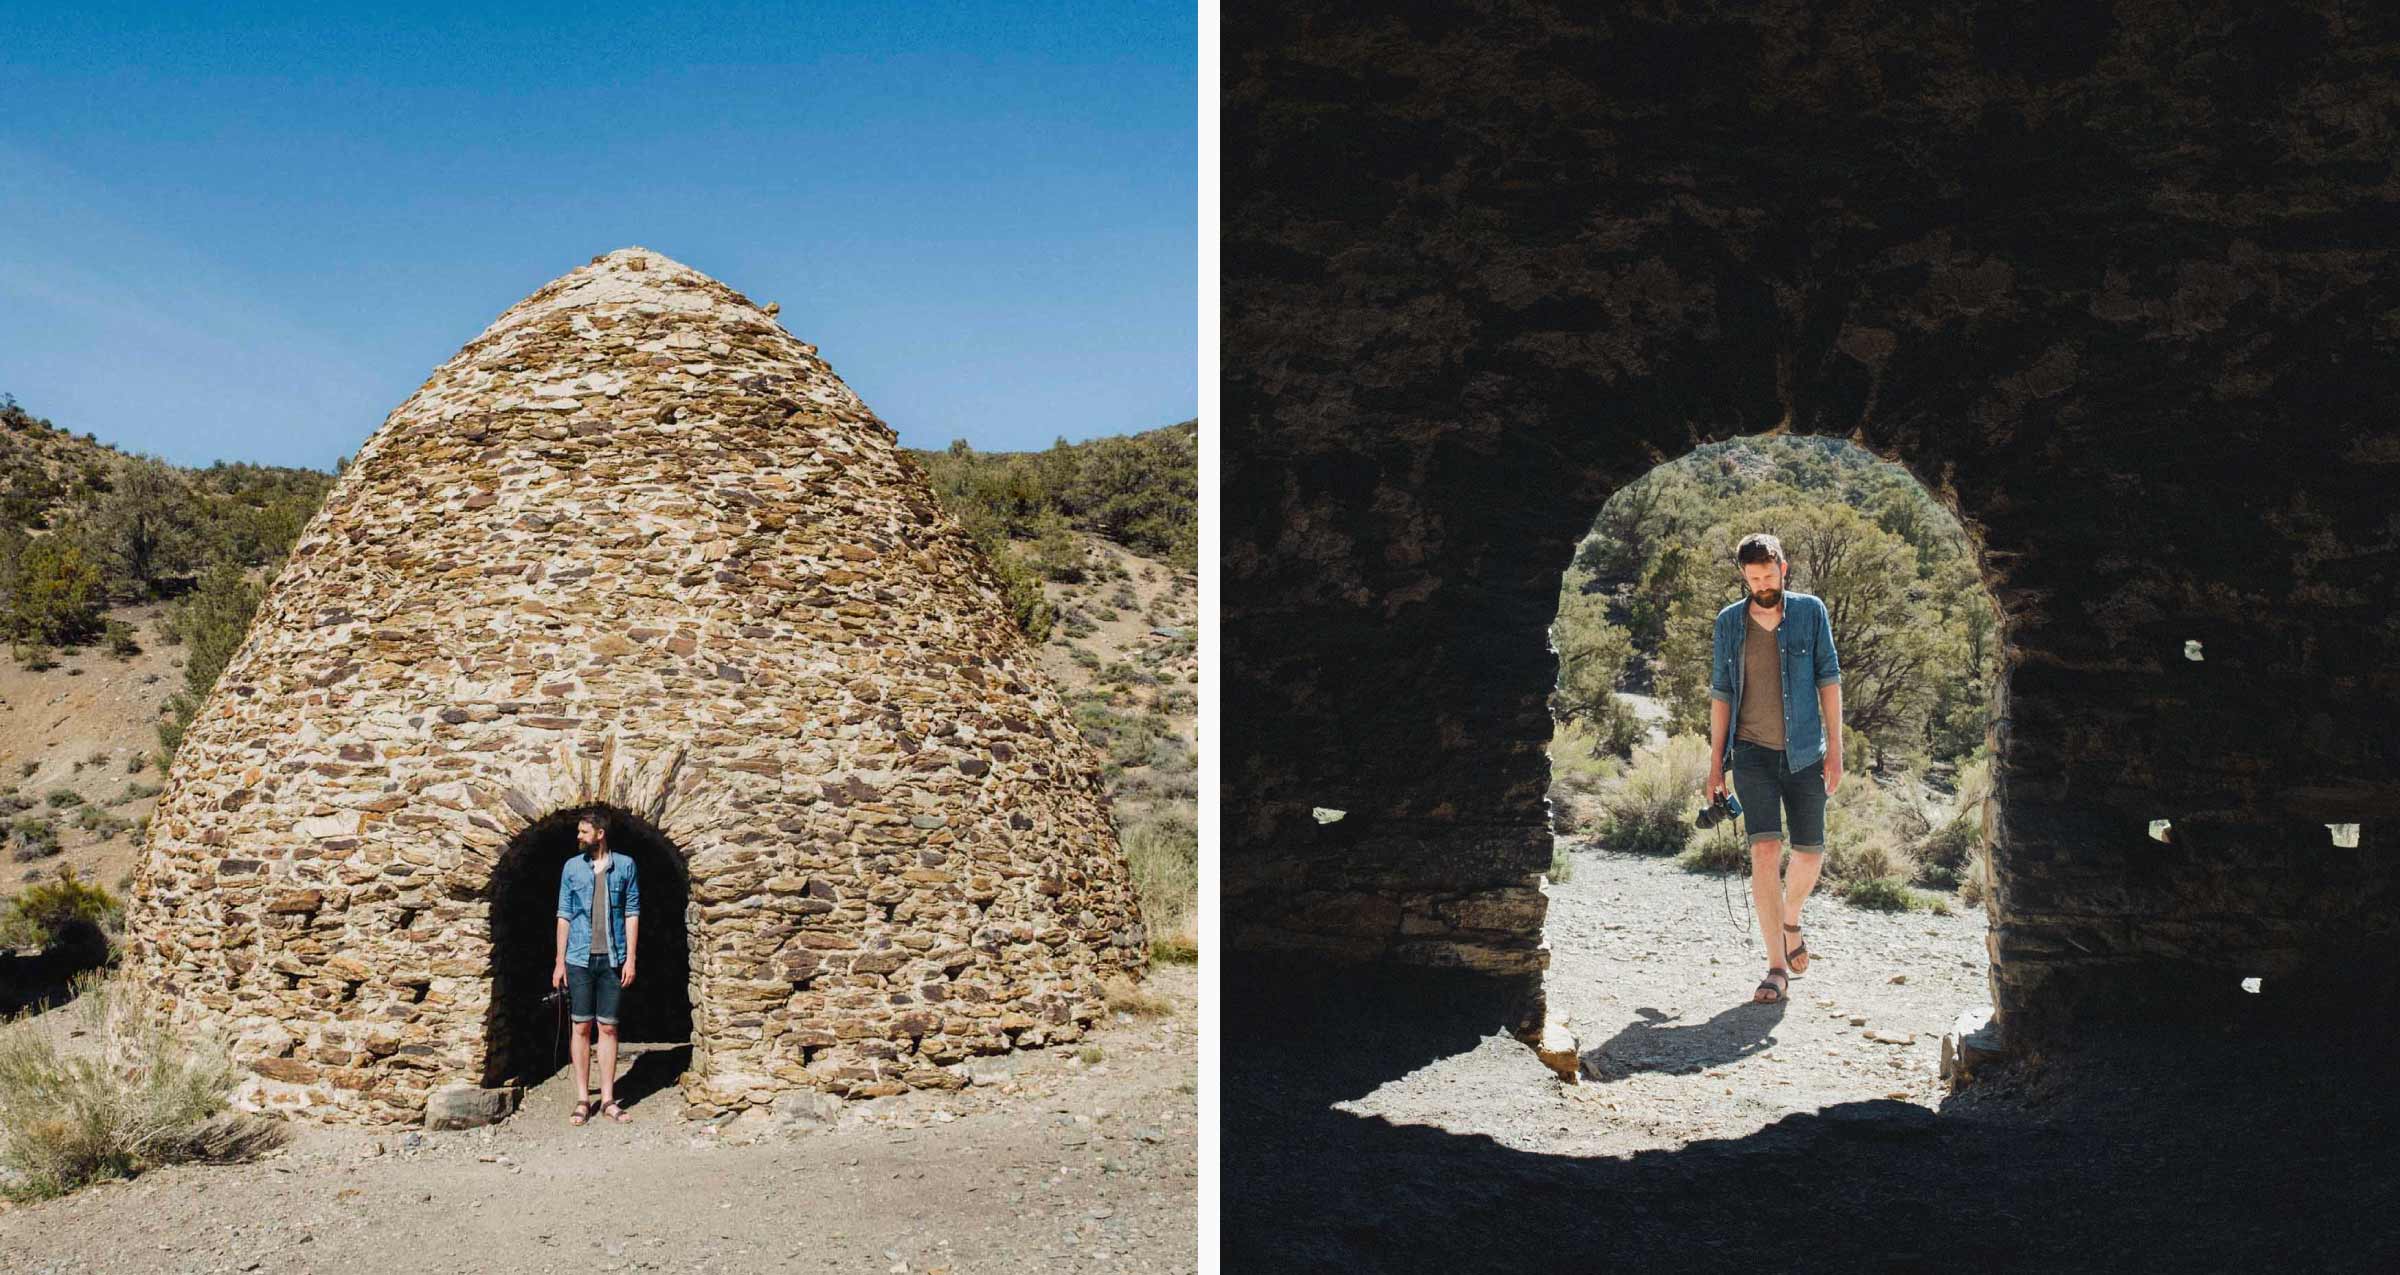 Into the charcoal kilns of Death Valley